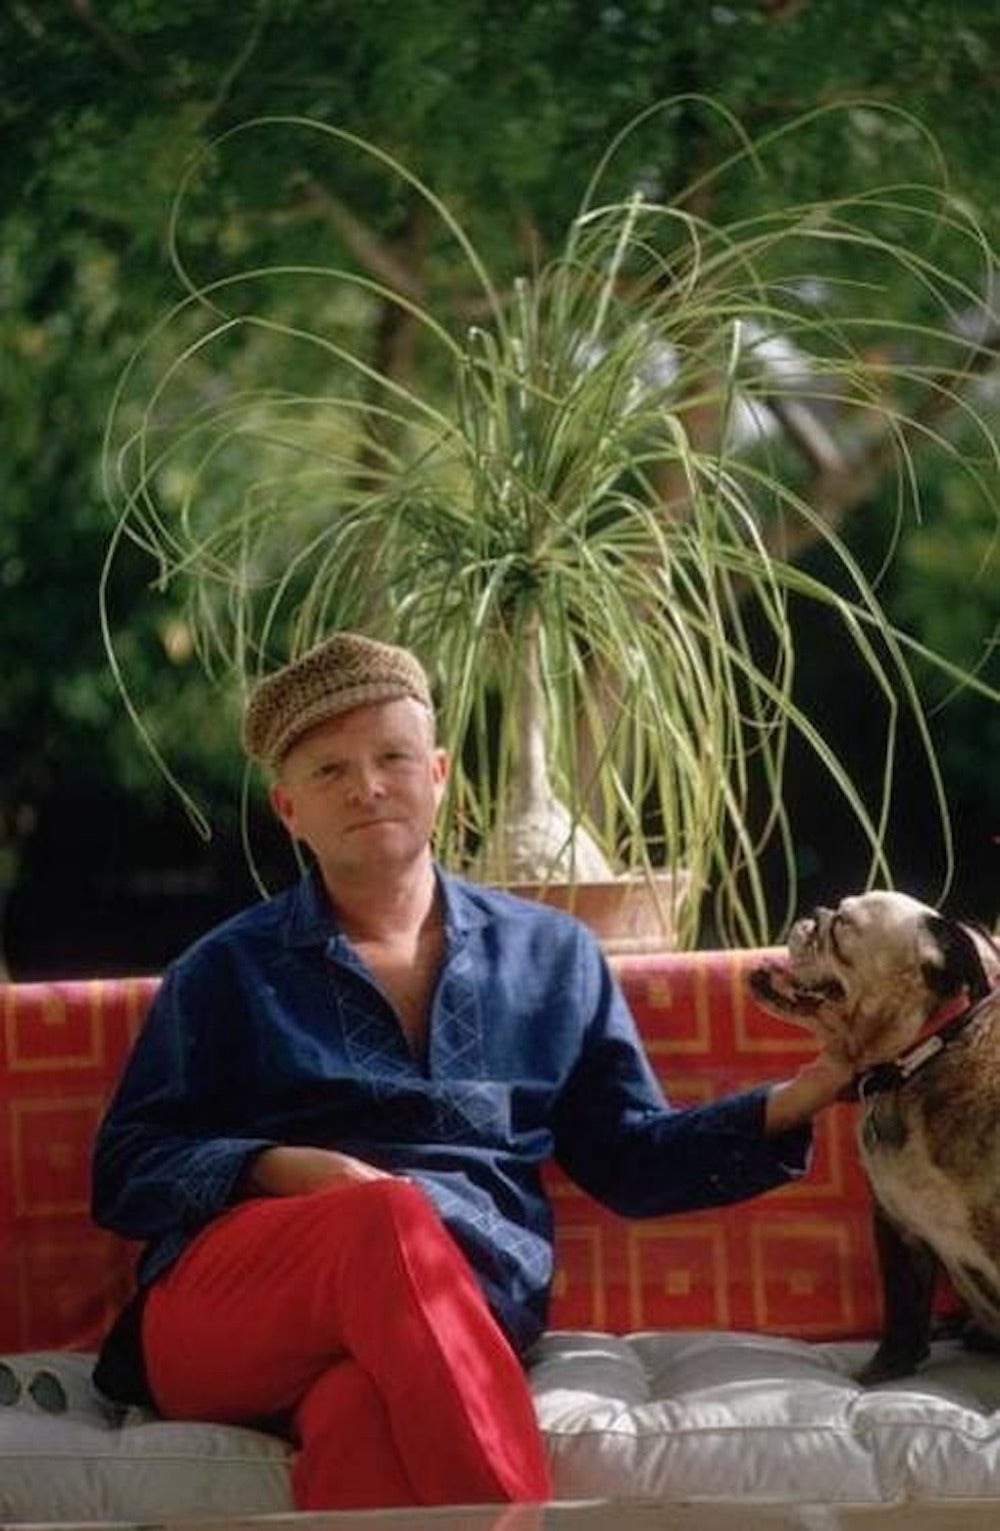 Slim Aarons
Truman Capote
Slim Aarons Estate Edition

1970: Author of 'Breakfast at Tiffany's' and 'In Cold Blood,' Truman Capote (1924 - 1984) and his dog in Palm Springs, California.

60 x 40 inches
$3950

40 x 30 inches
$3350

30 x 20